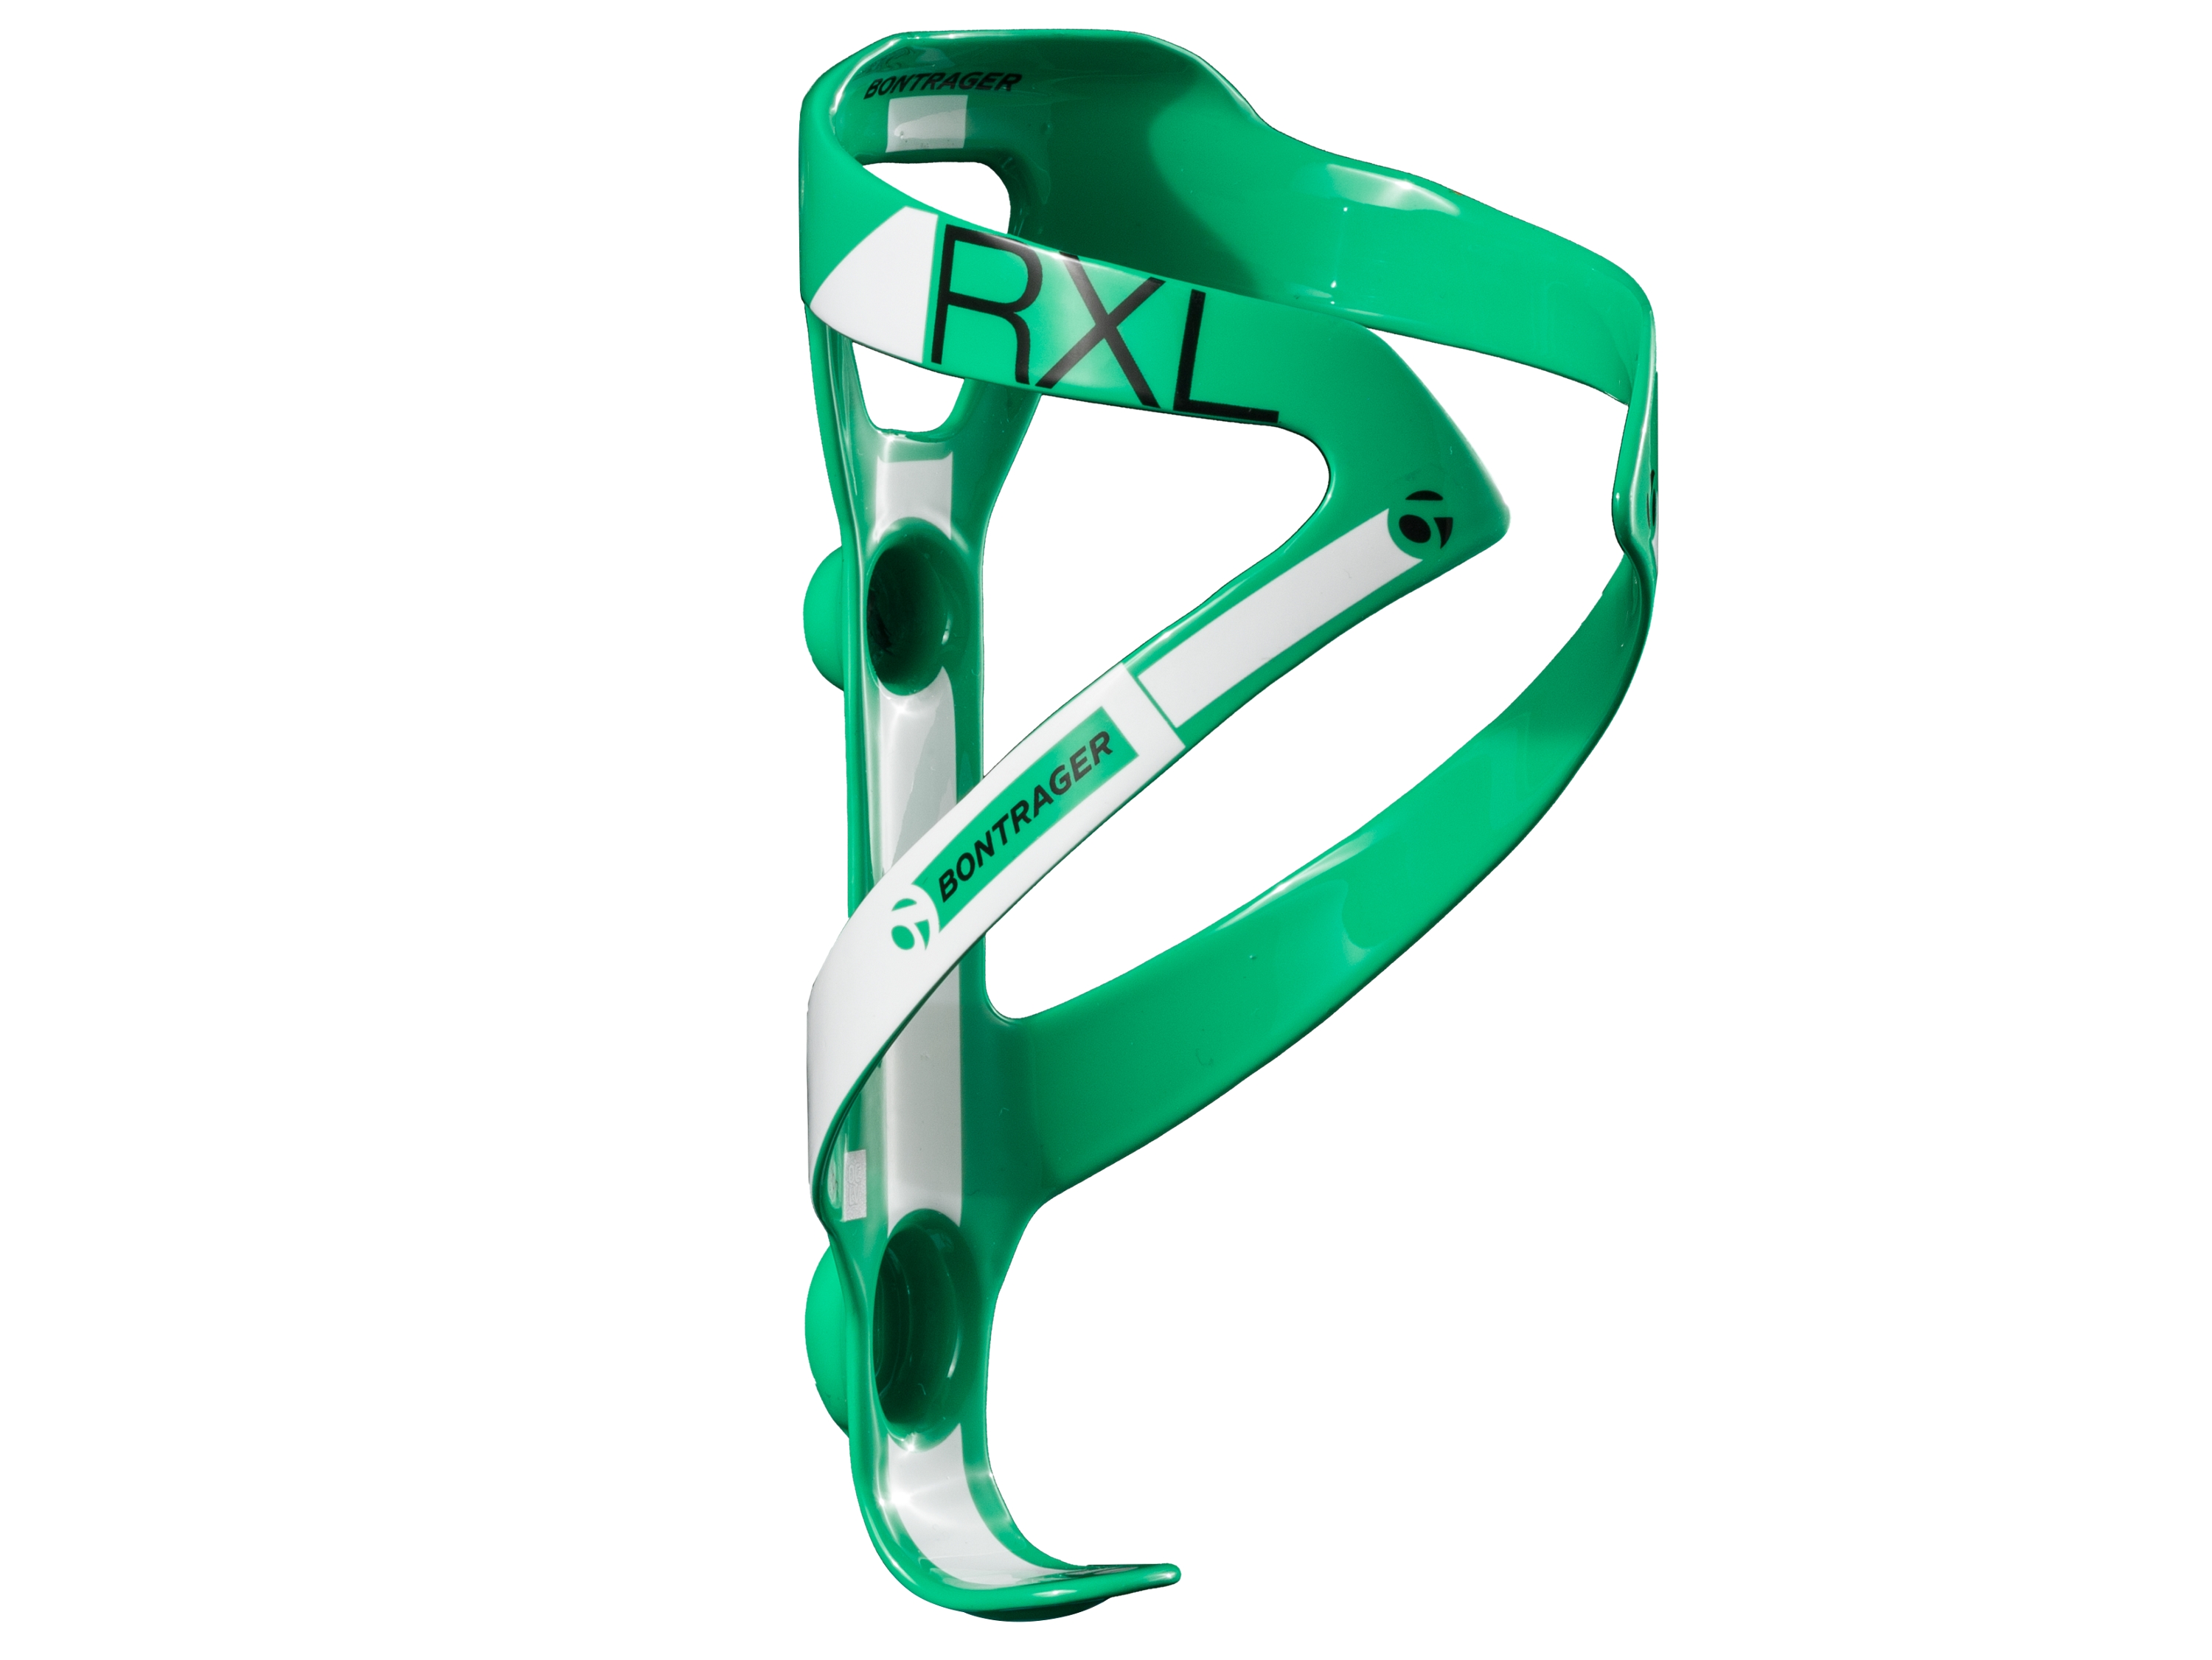 green bottle cage